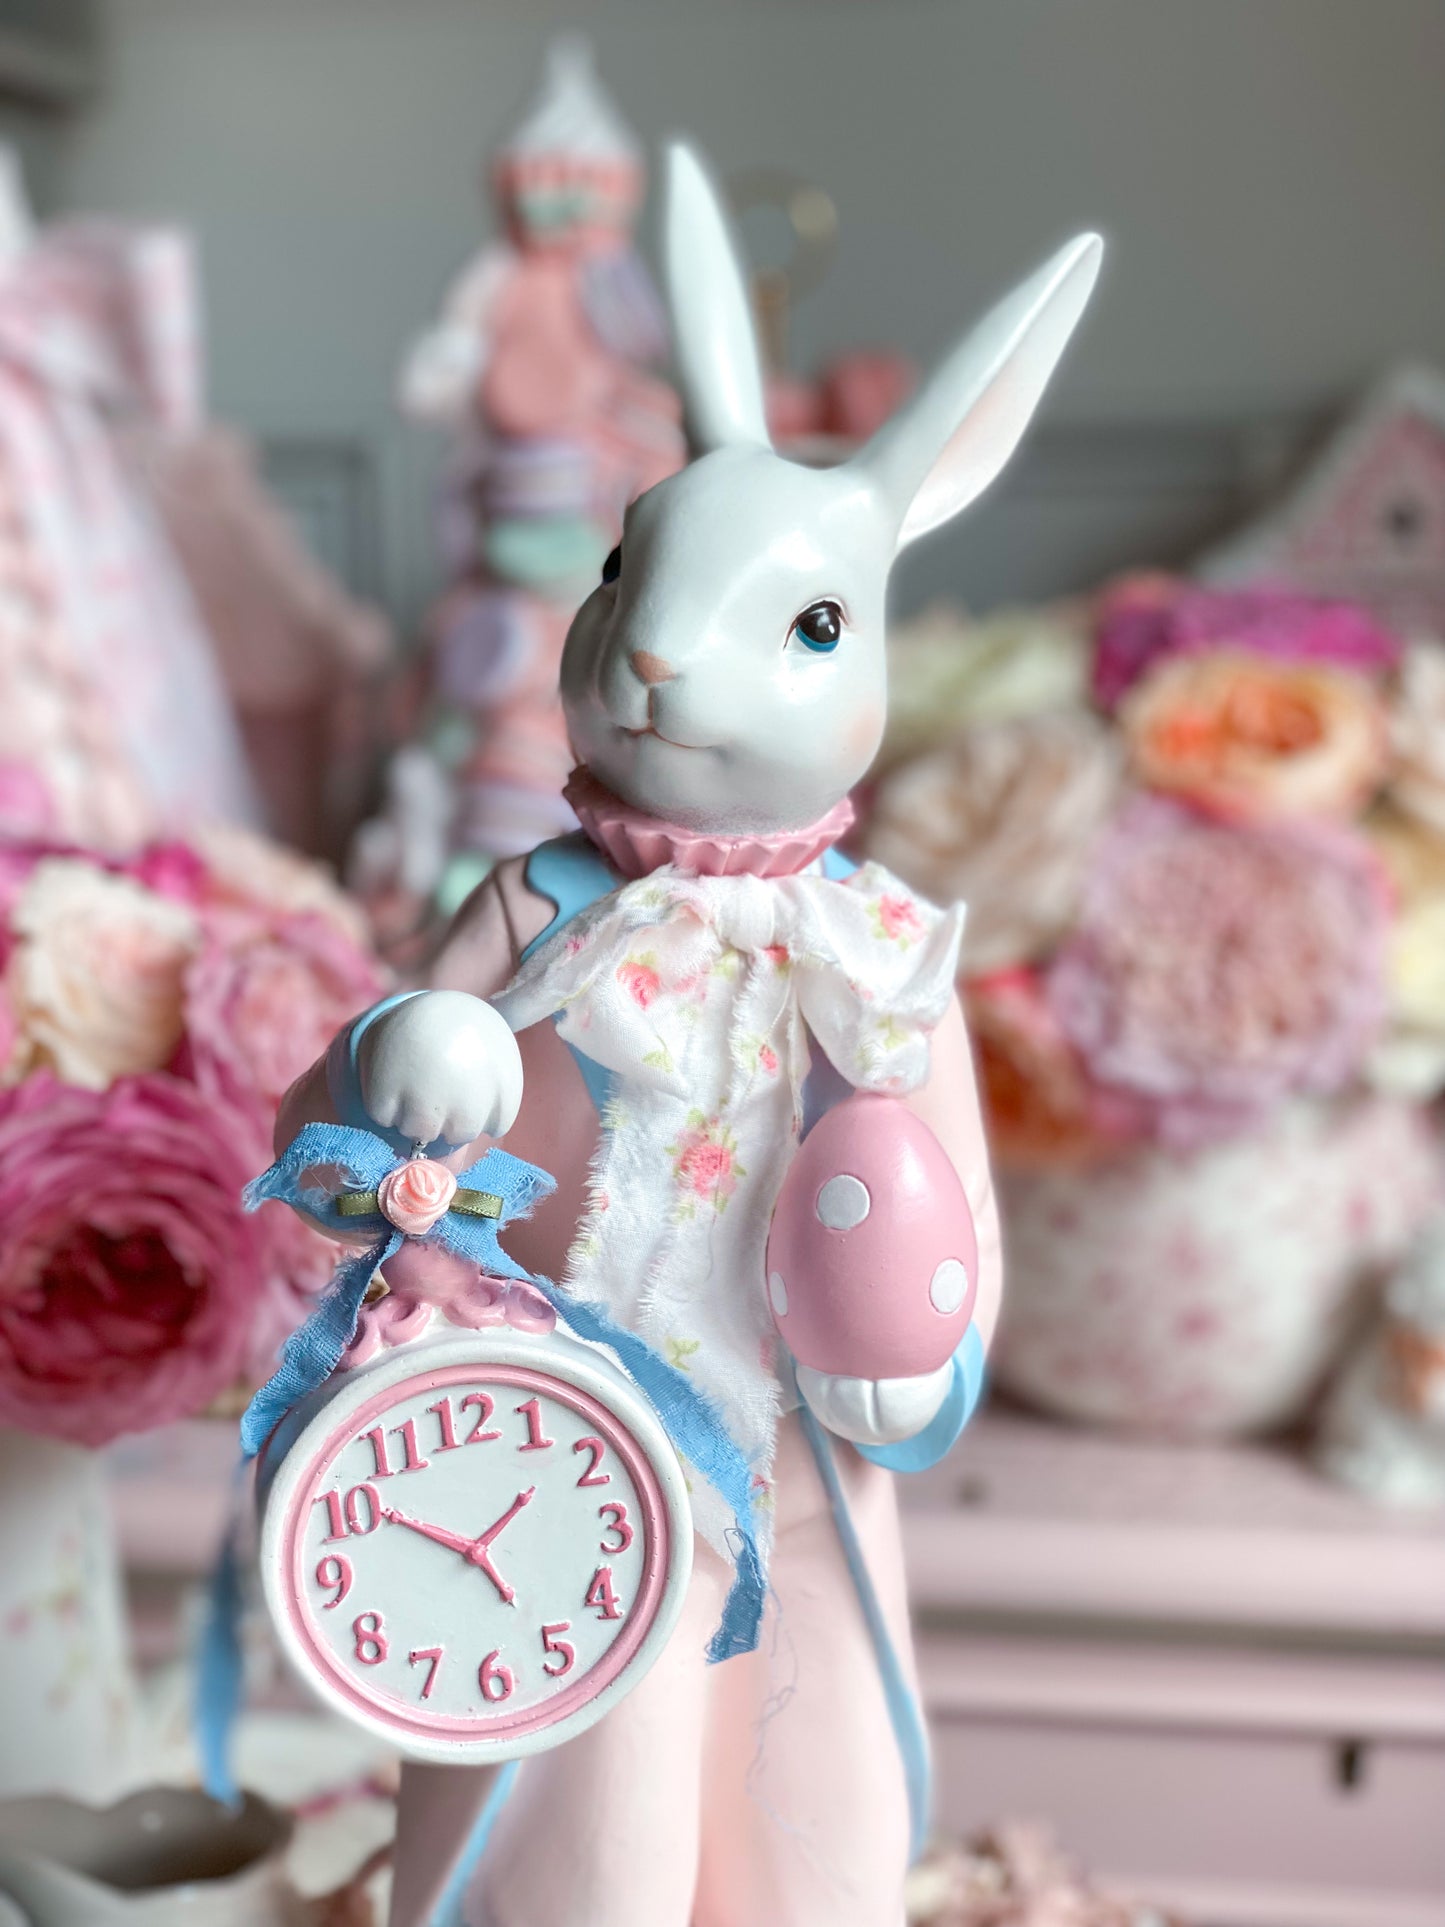 Bespoke Hand Painted Pastel Pink and Blue White Rabbit Figurine Holding Pocket Watch